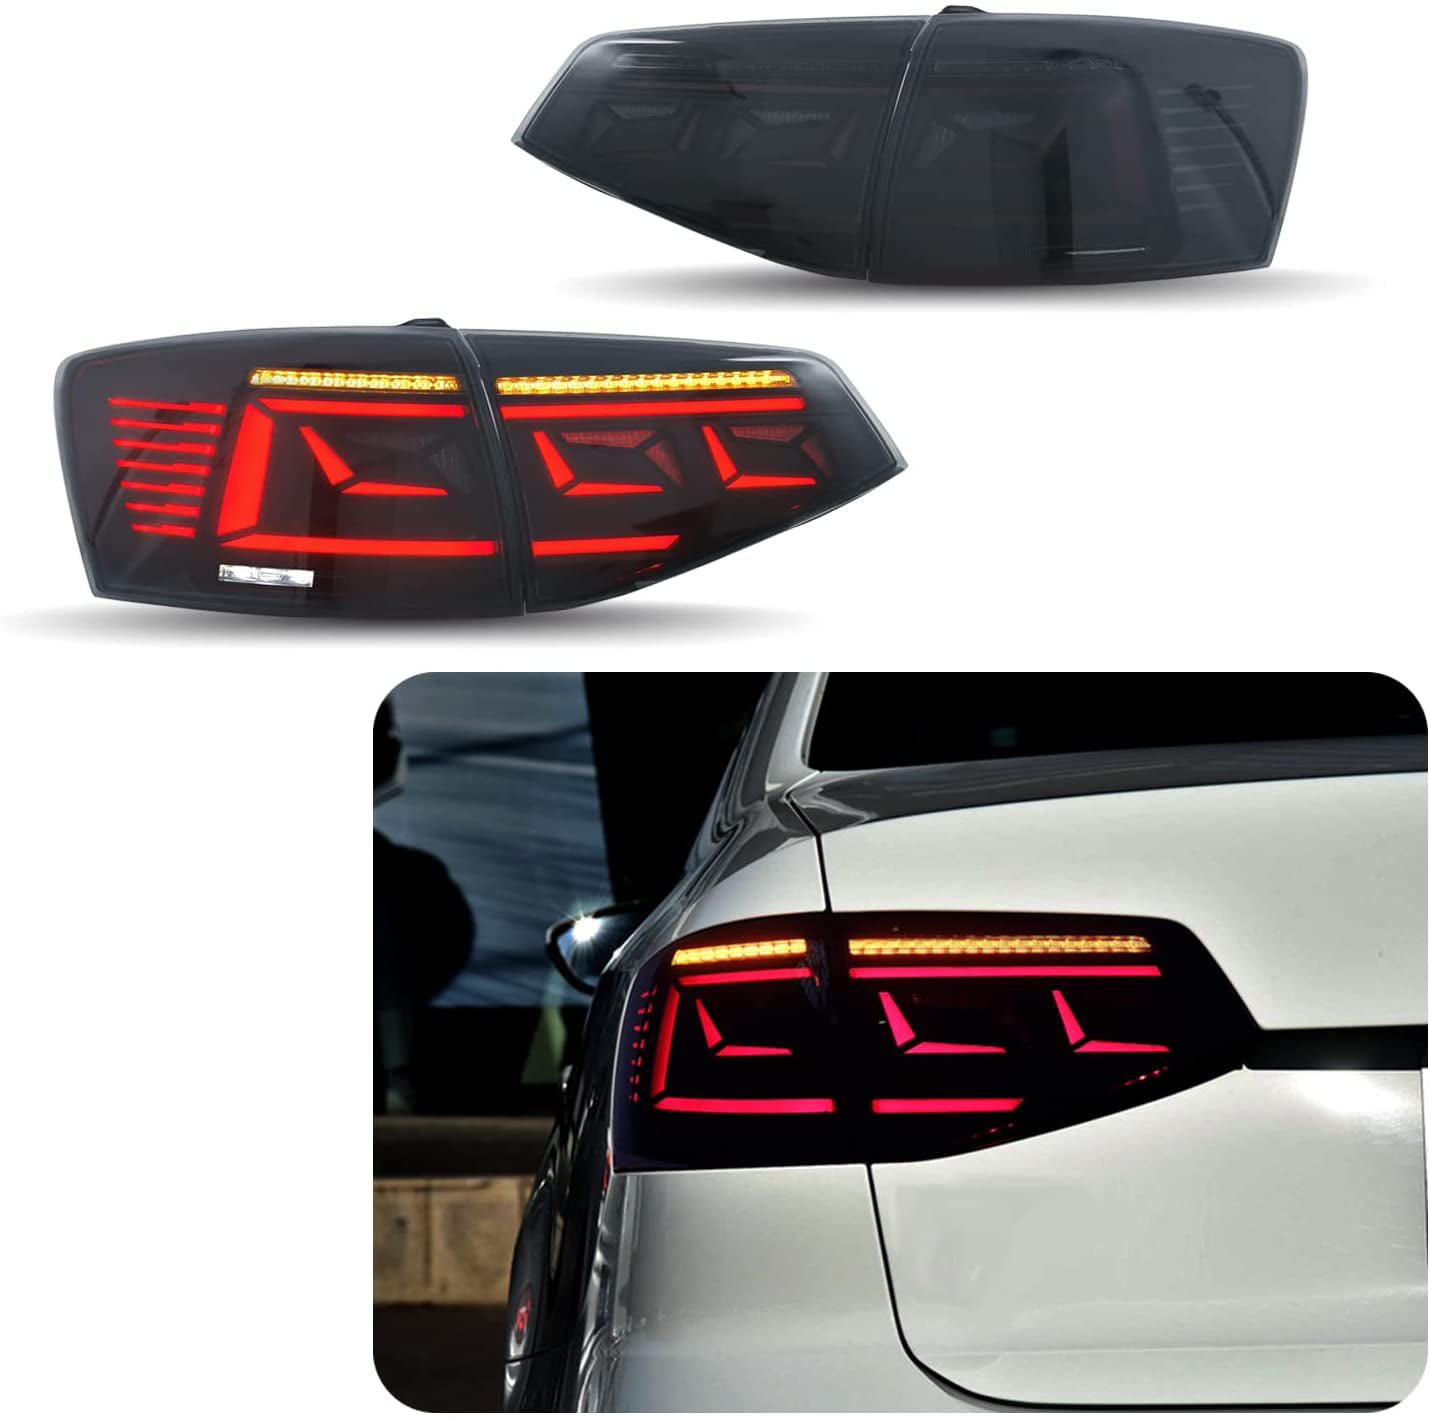 Inginuity Time LED SMOKED Tail Lights For VW Volkswagen Jetta 2015 2016  2017 2018 With Start Up Animation Sequential Indicator Rear Lamp Assembly -  